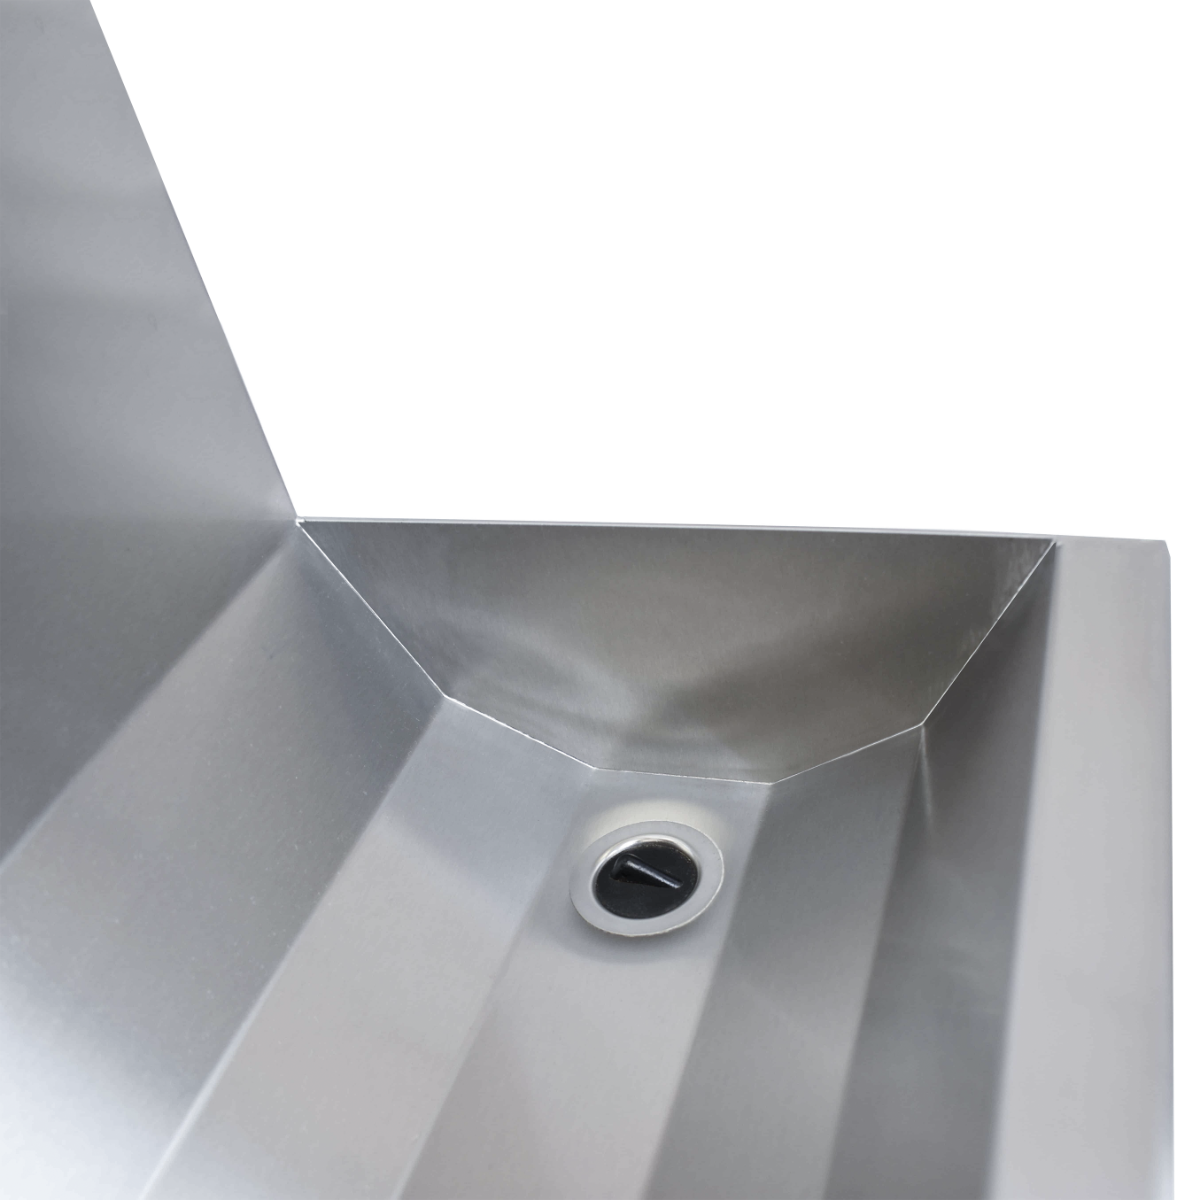 Stainless steel three station knee operated wash trough